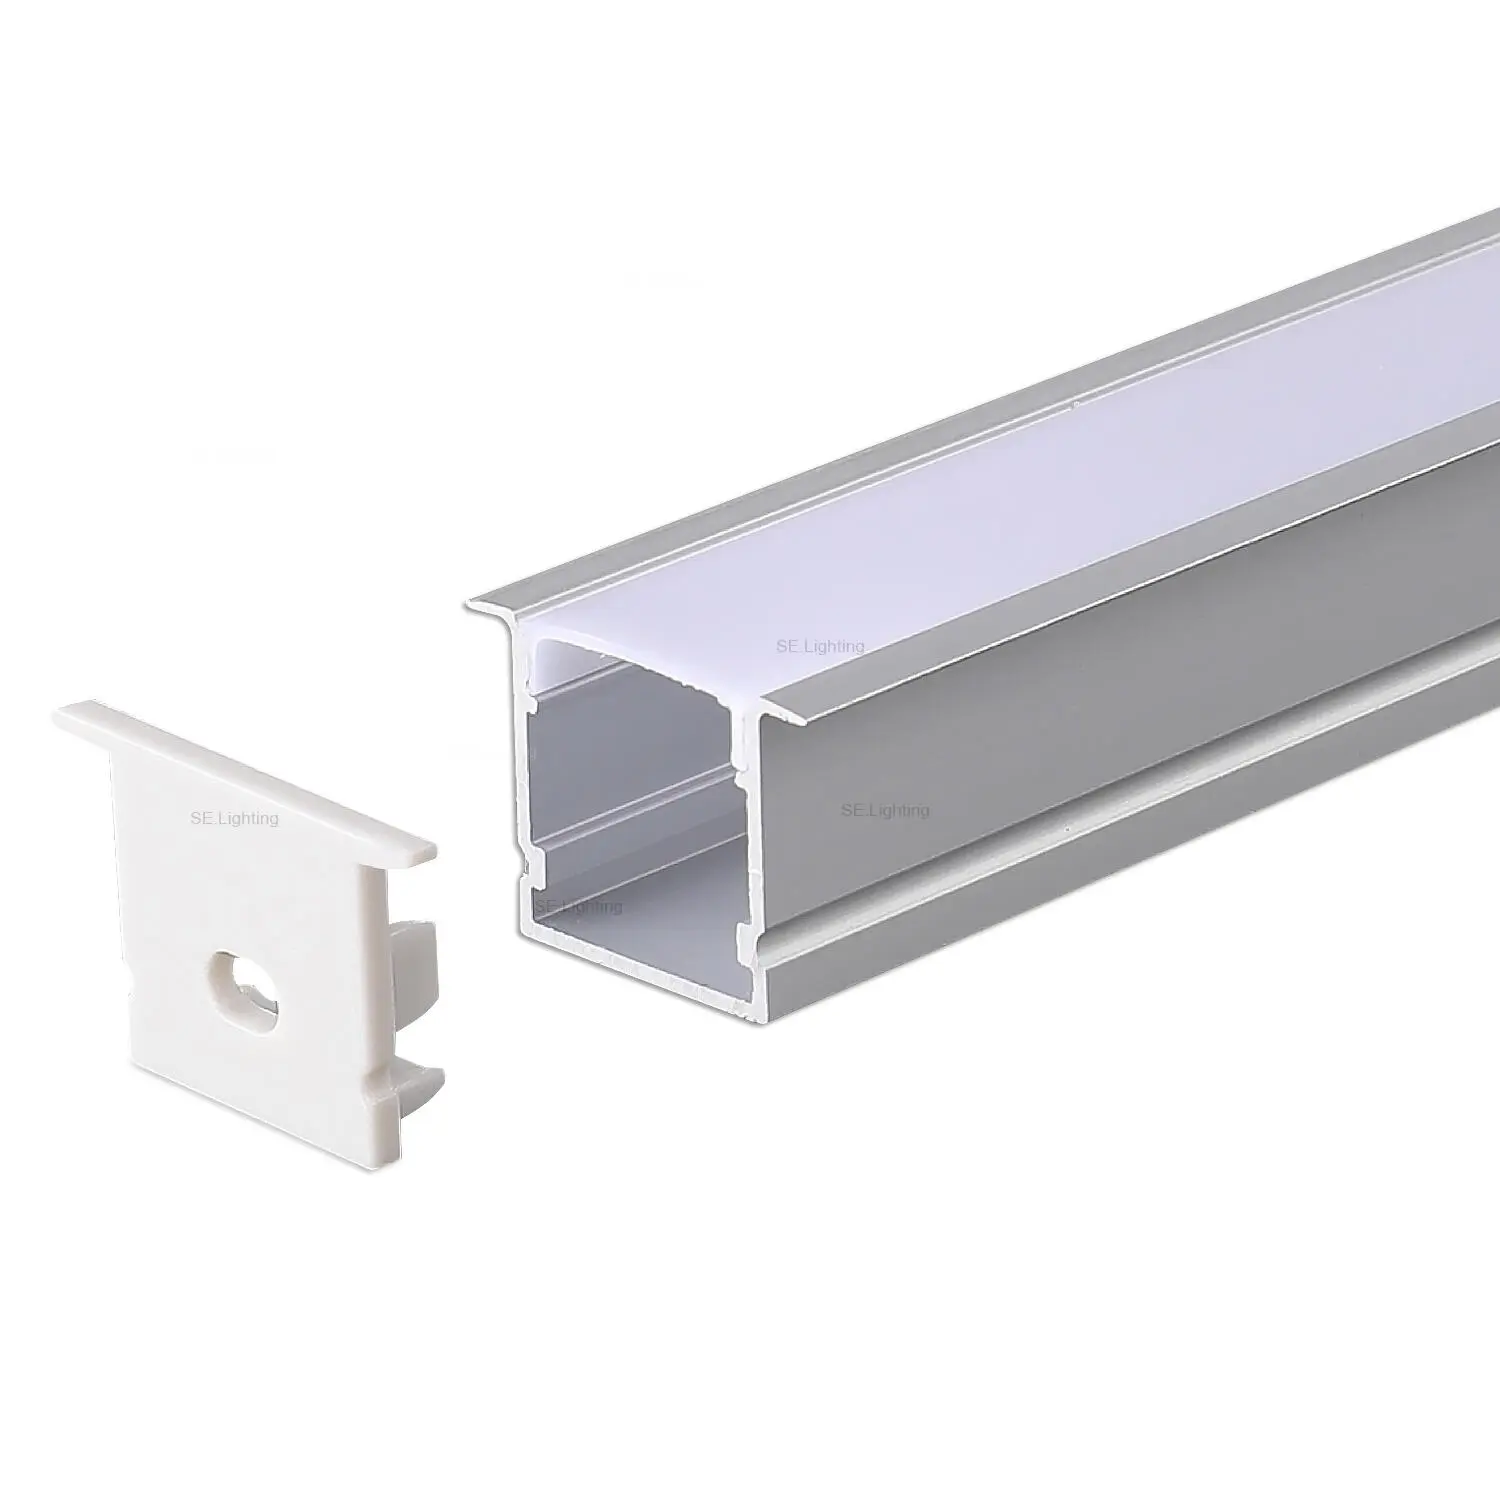 LED Light Strip Diffuser Channel 20x20mm Supplier